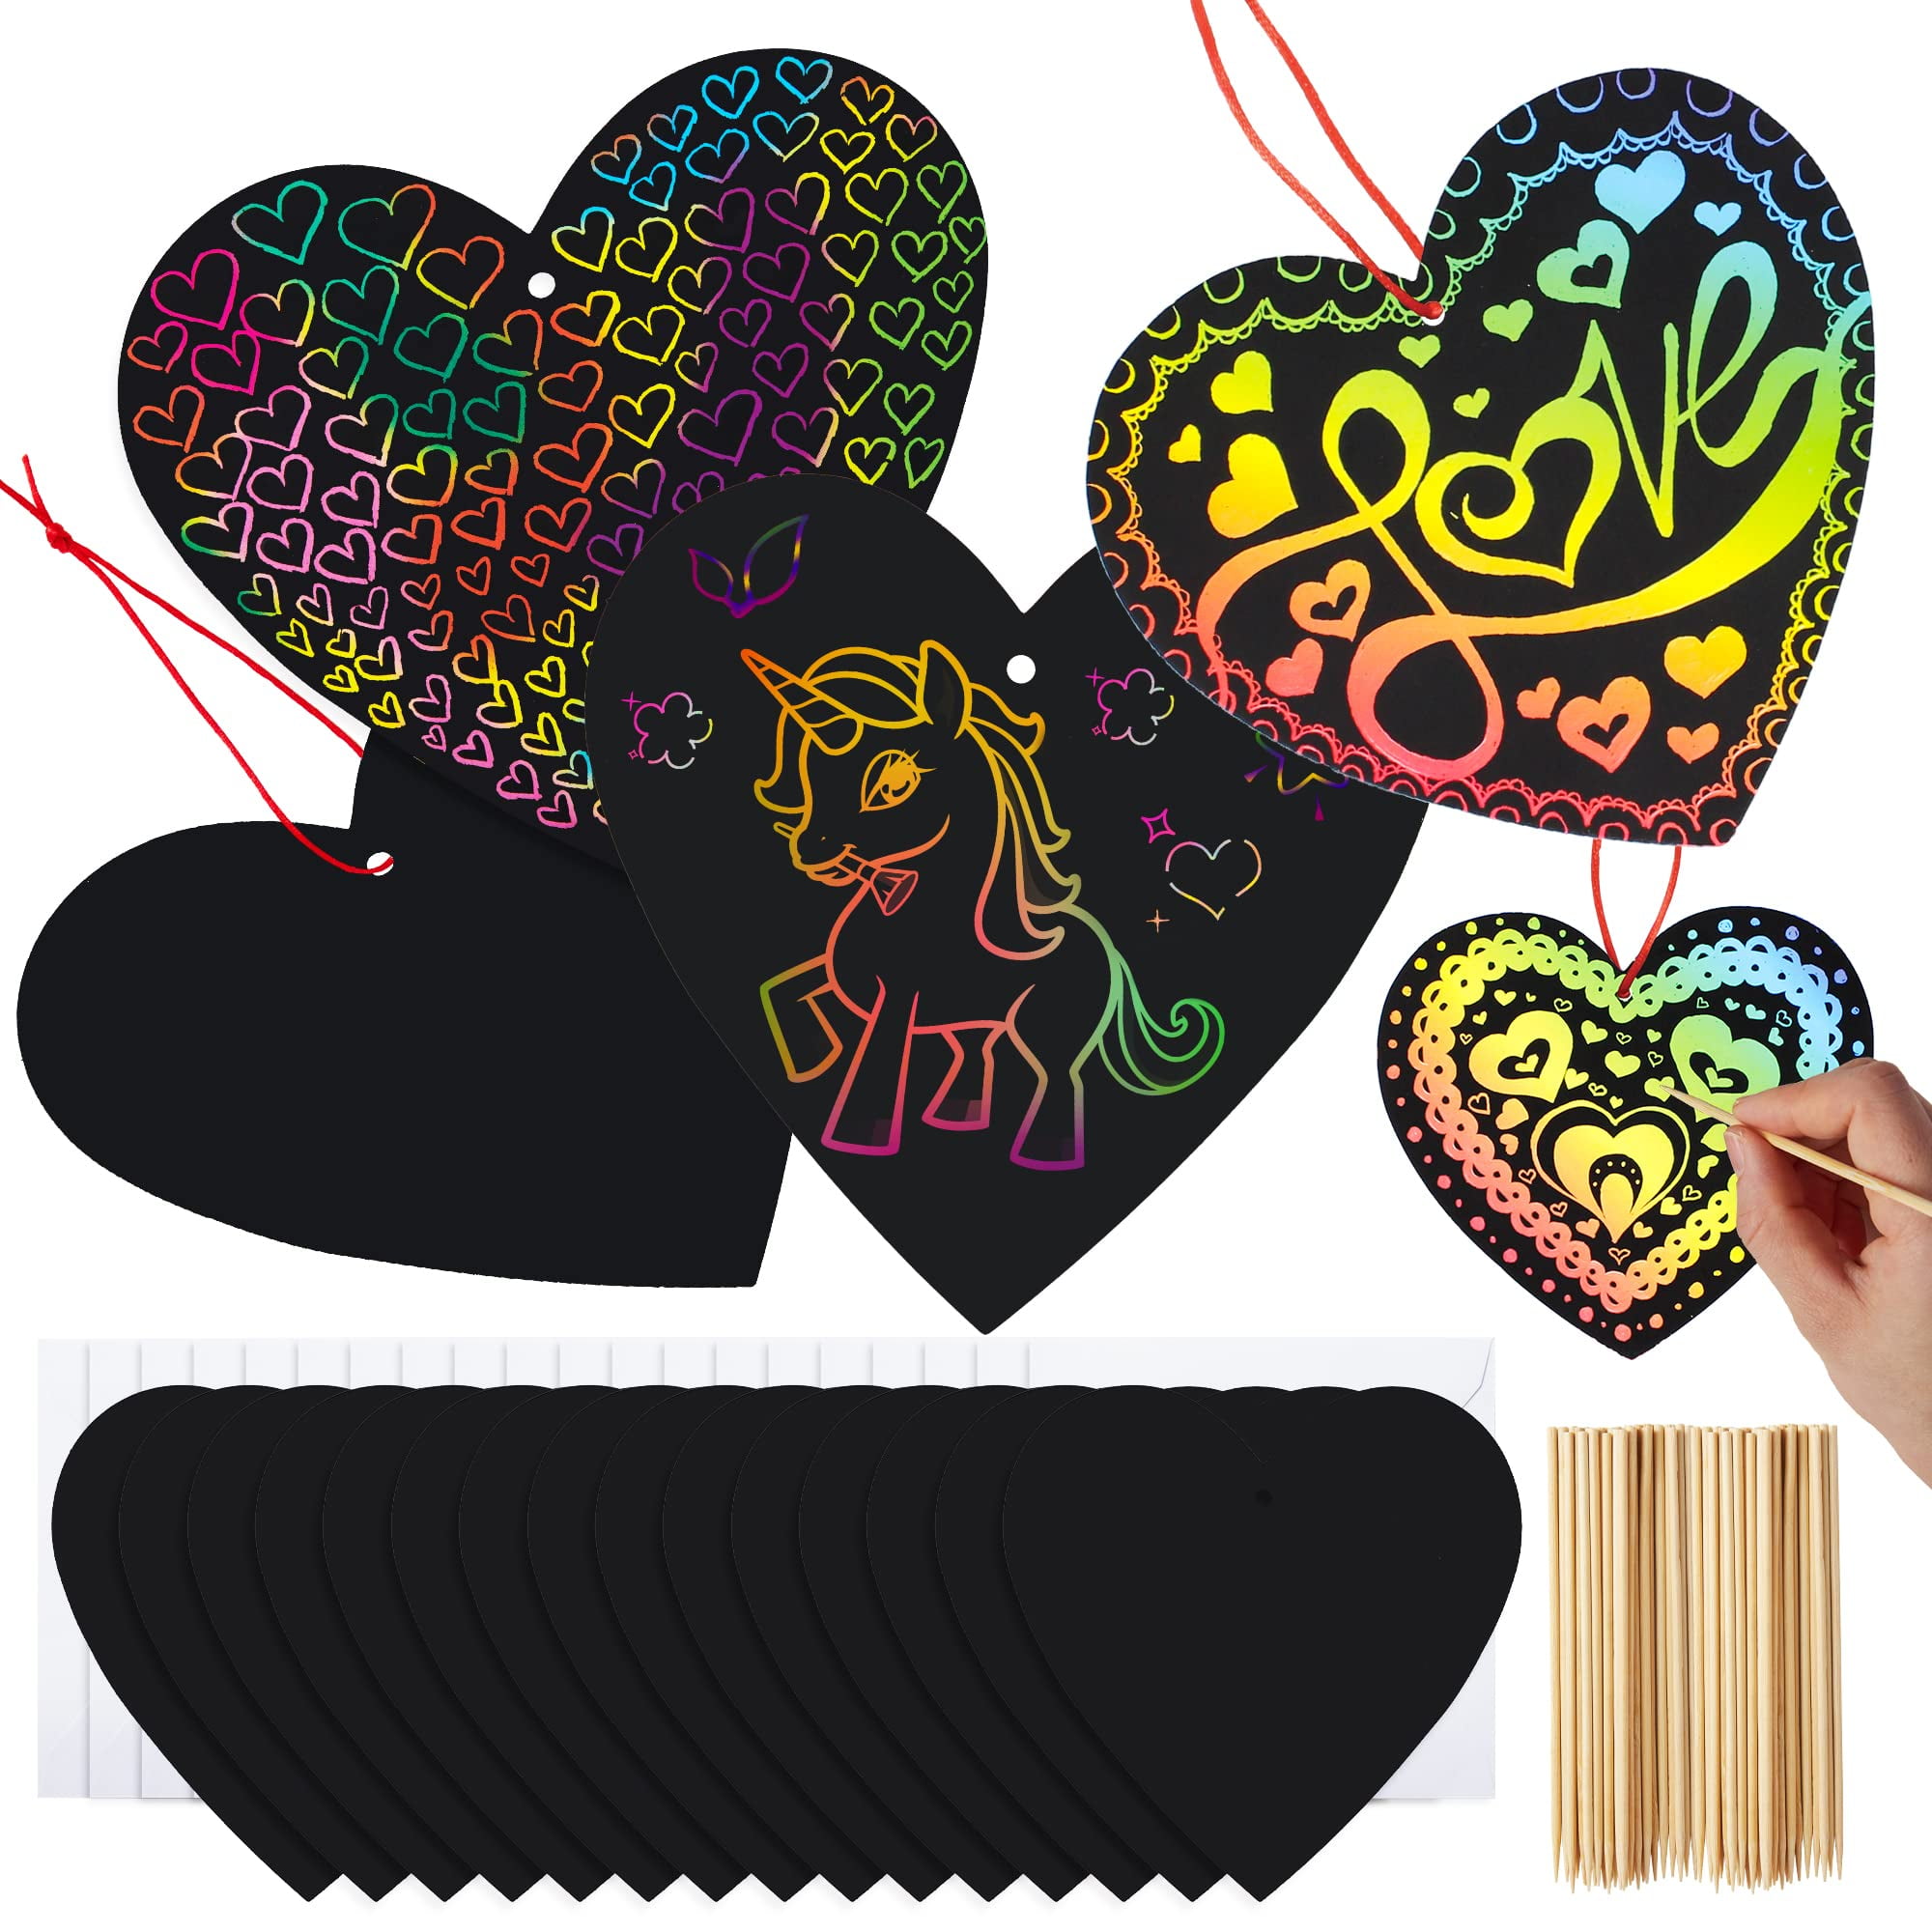 Natonhi 36 Pack Valentines Day Gifts Card for Kids,Heart Rainbow Scratch  Art Paper Valentine Crafts for Kids Party Favors Classroom Exchange Prizes